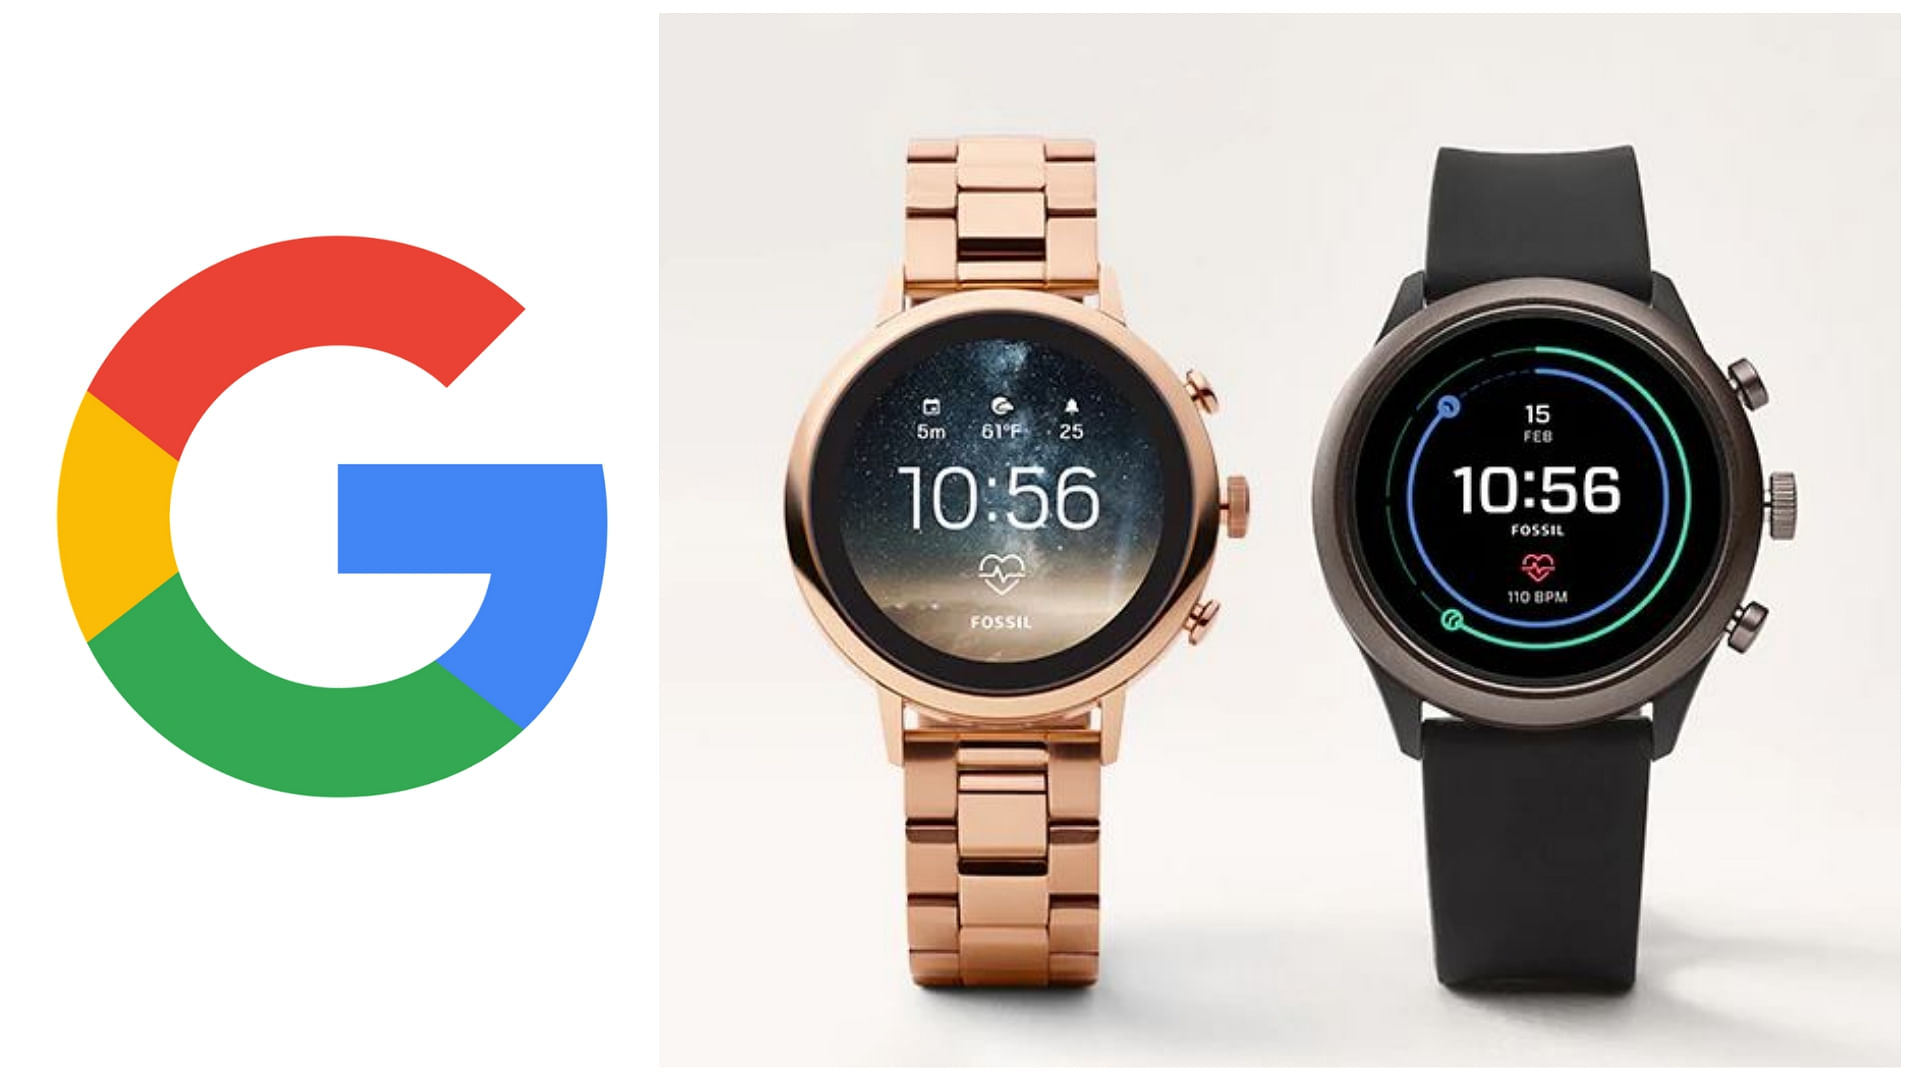 The deal, said to be worth $40 million, will see Google using Fossil’s smartwatch technology.